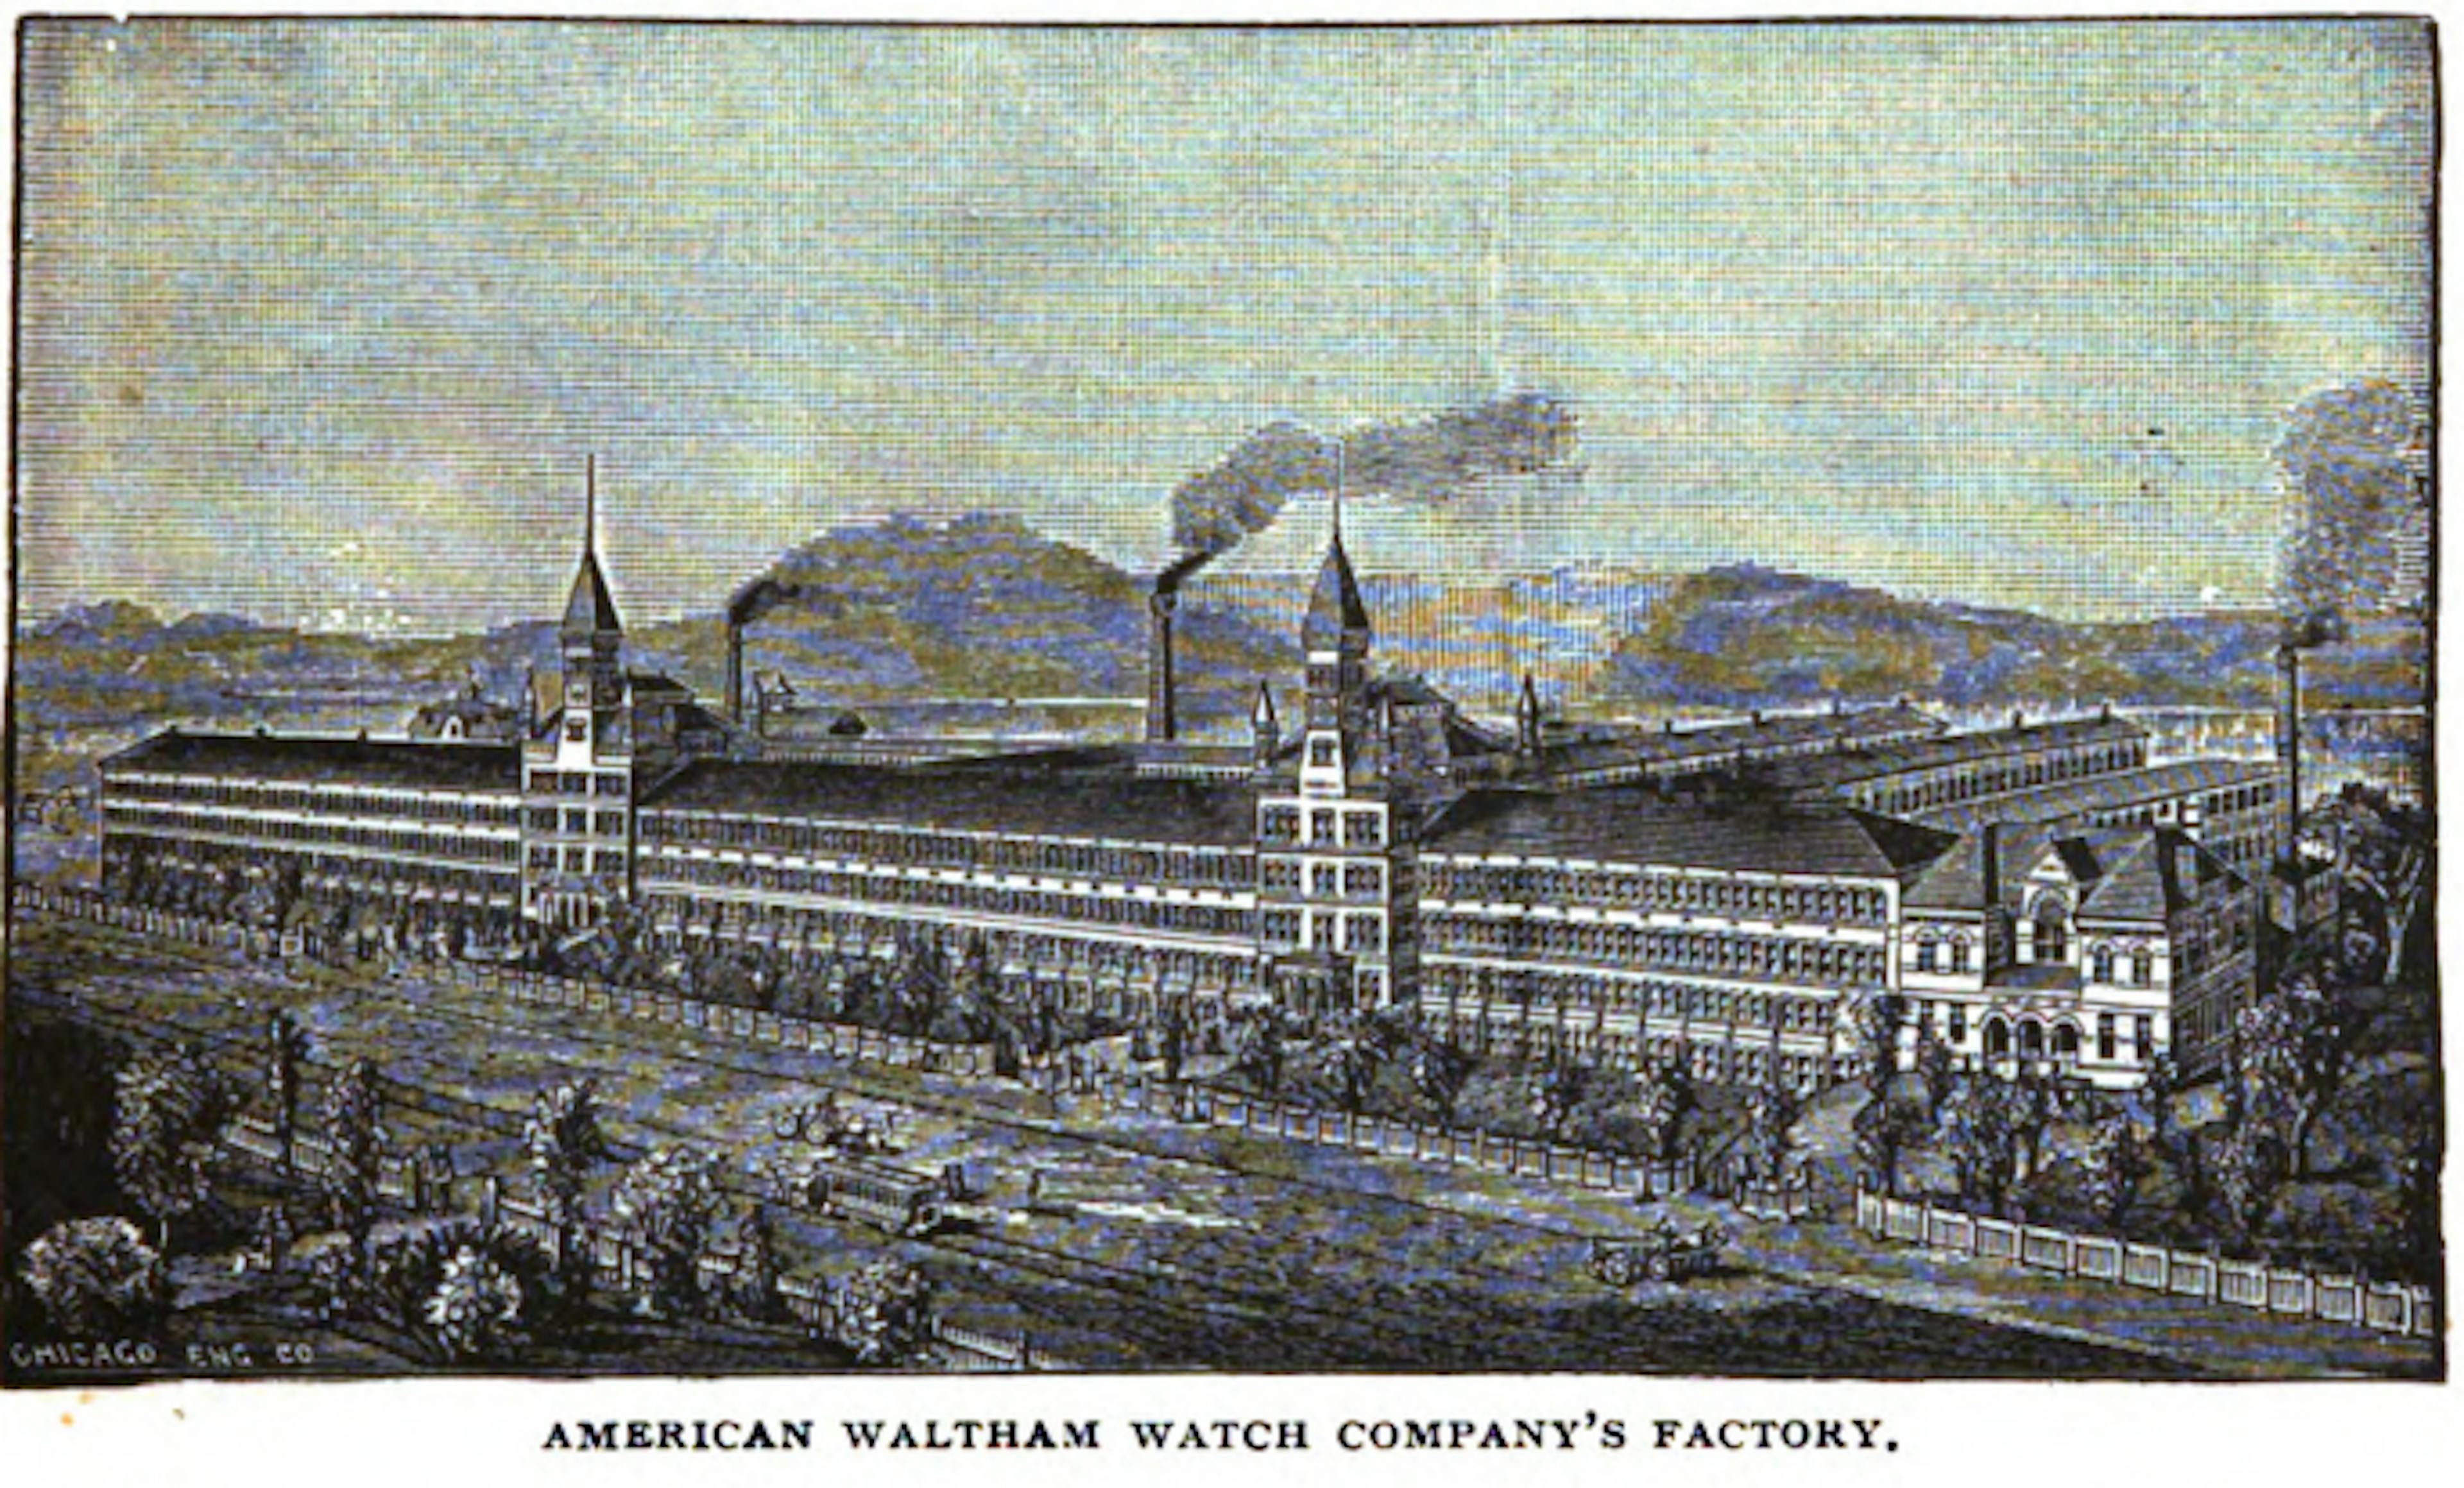 An Engraving of the Waltham Watch Factory in 1888, at the time the world's largest watch manufacturer.